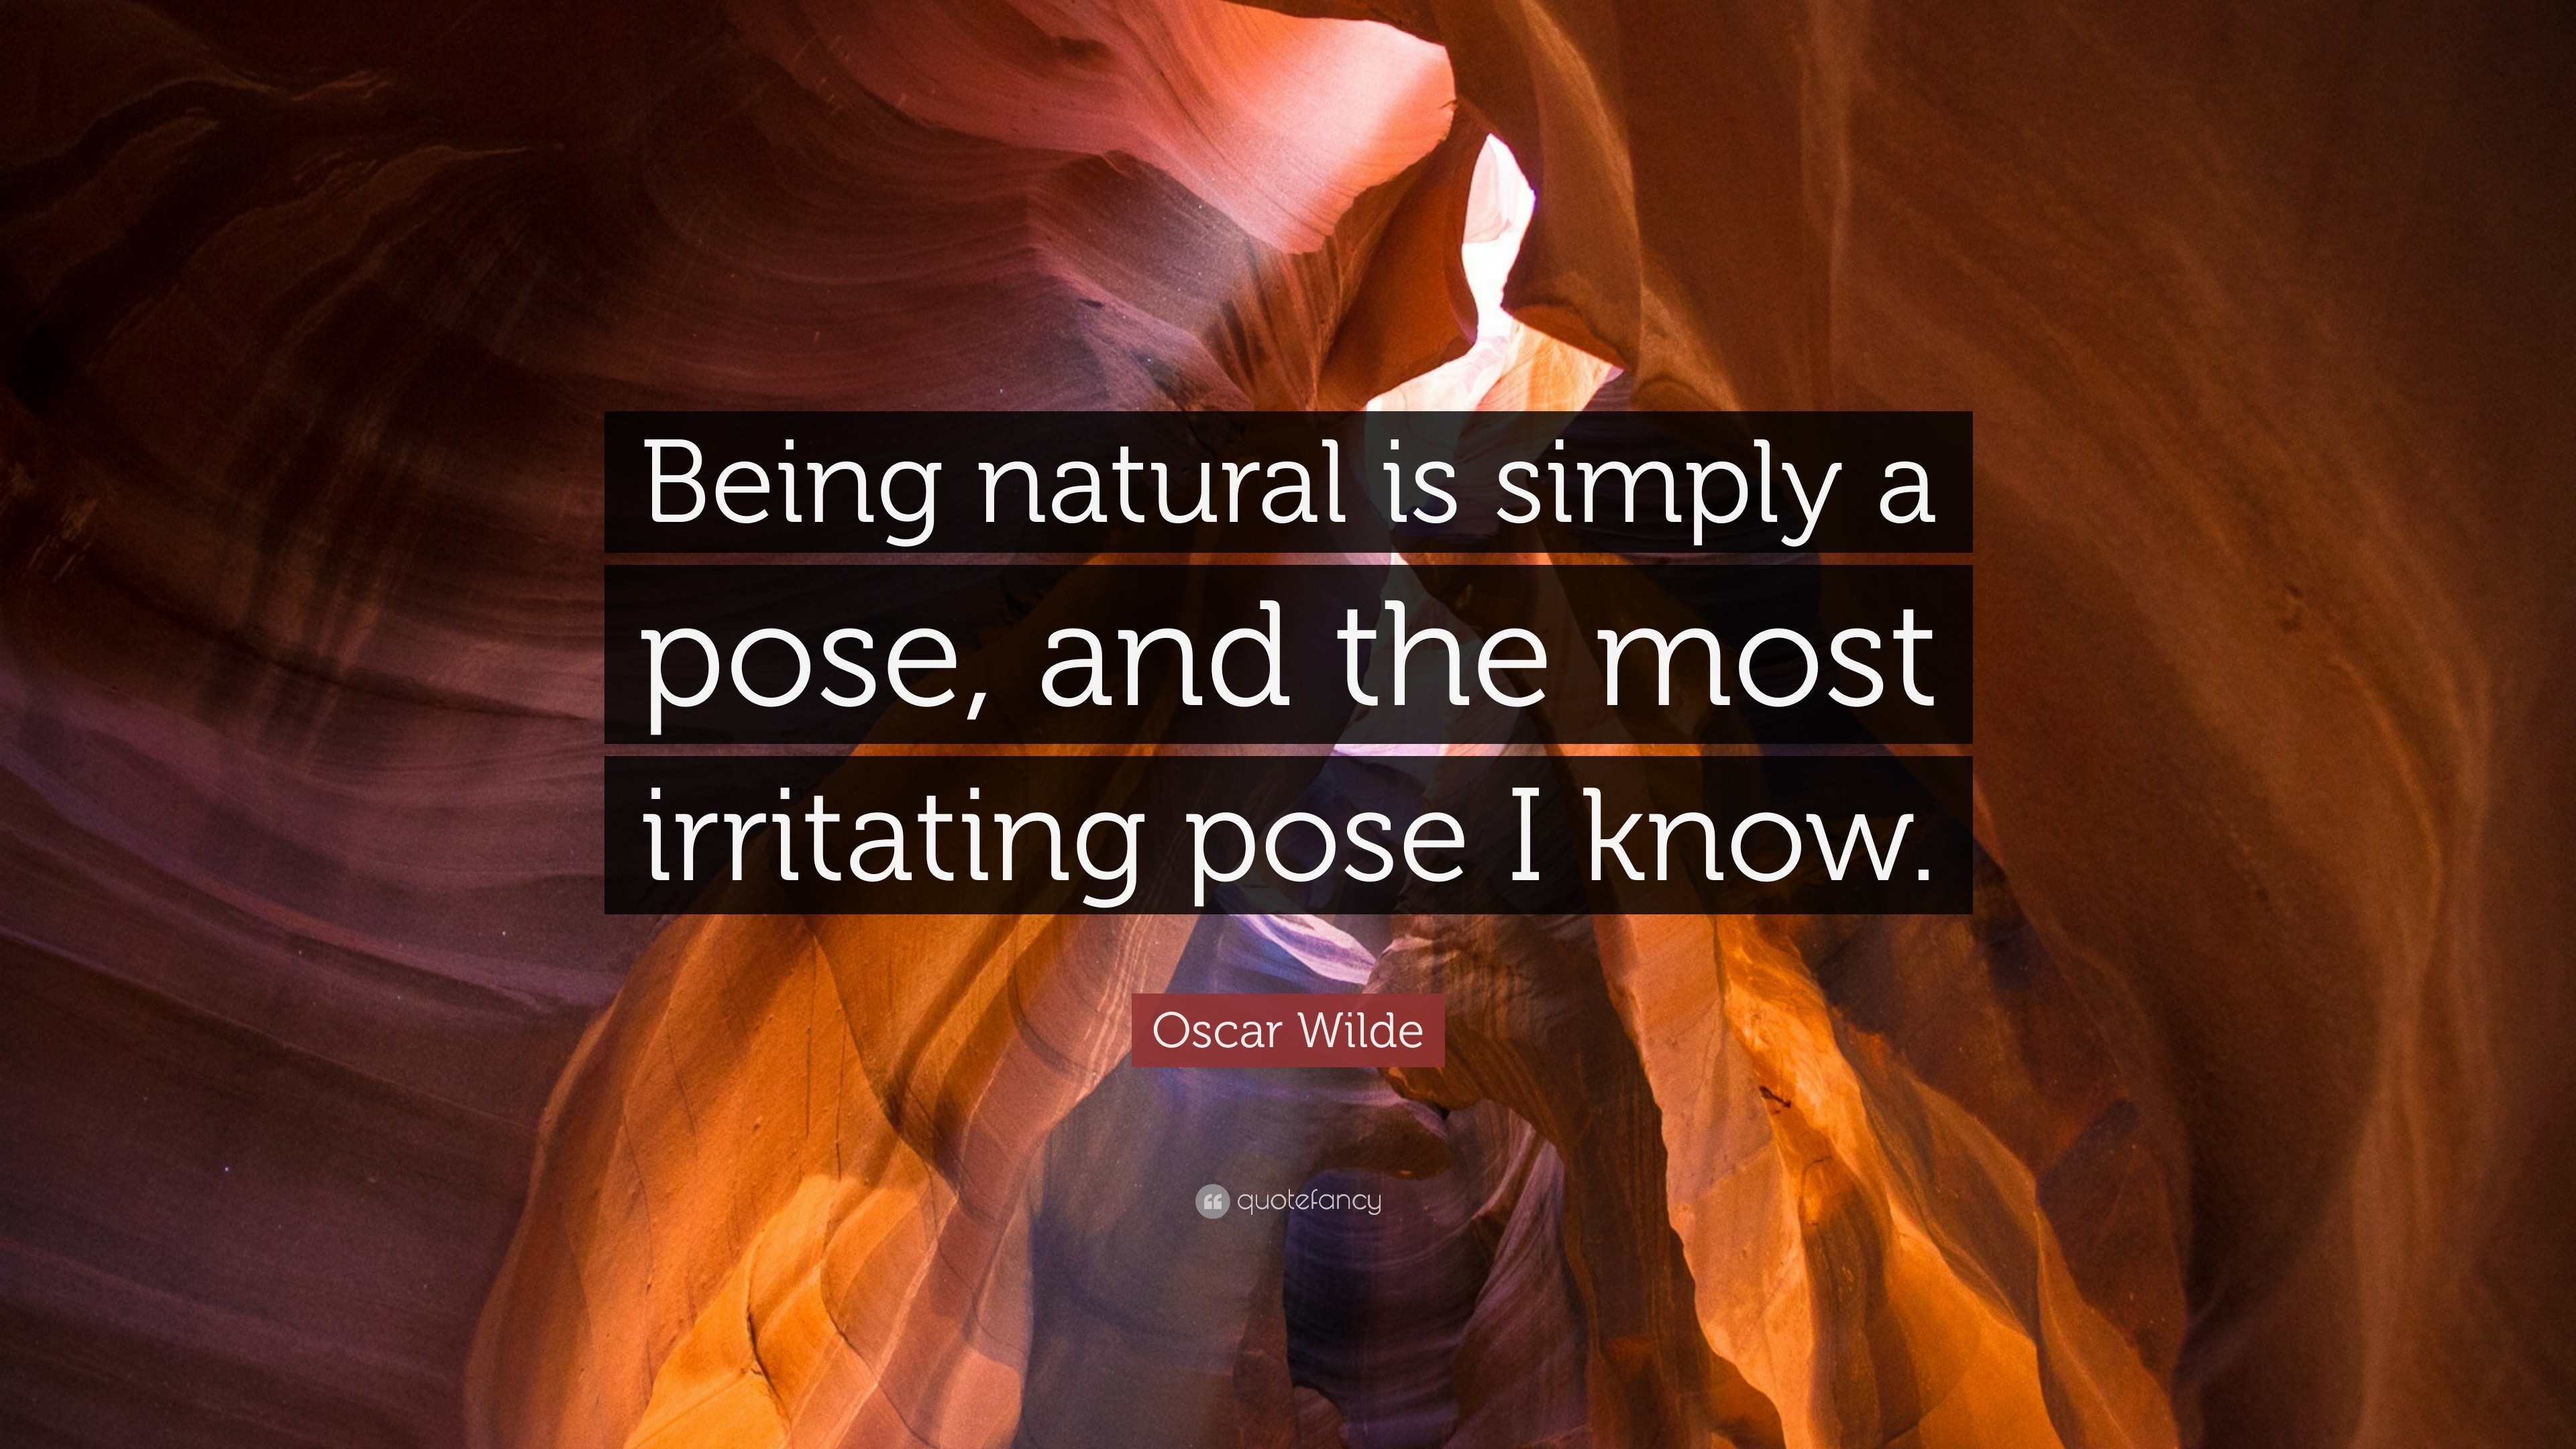 1842110 Oscar Wilde Quote Being natural is simply a pose and the most